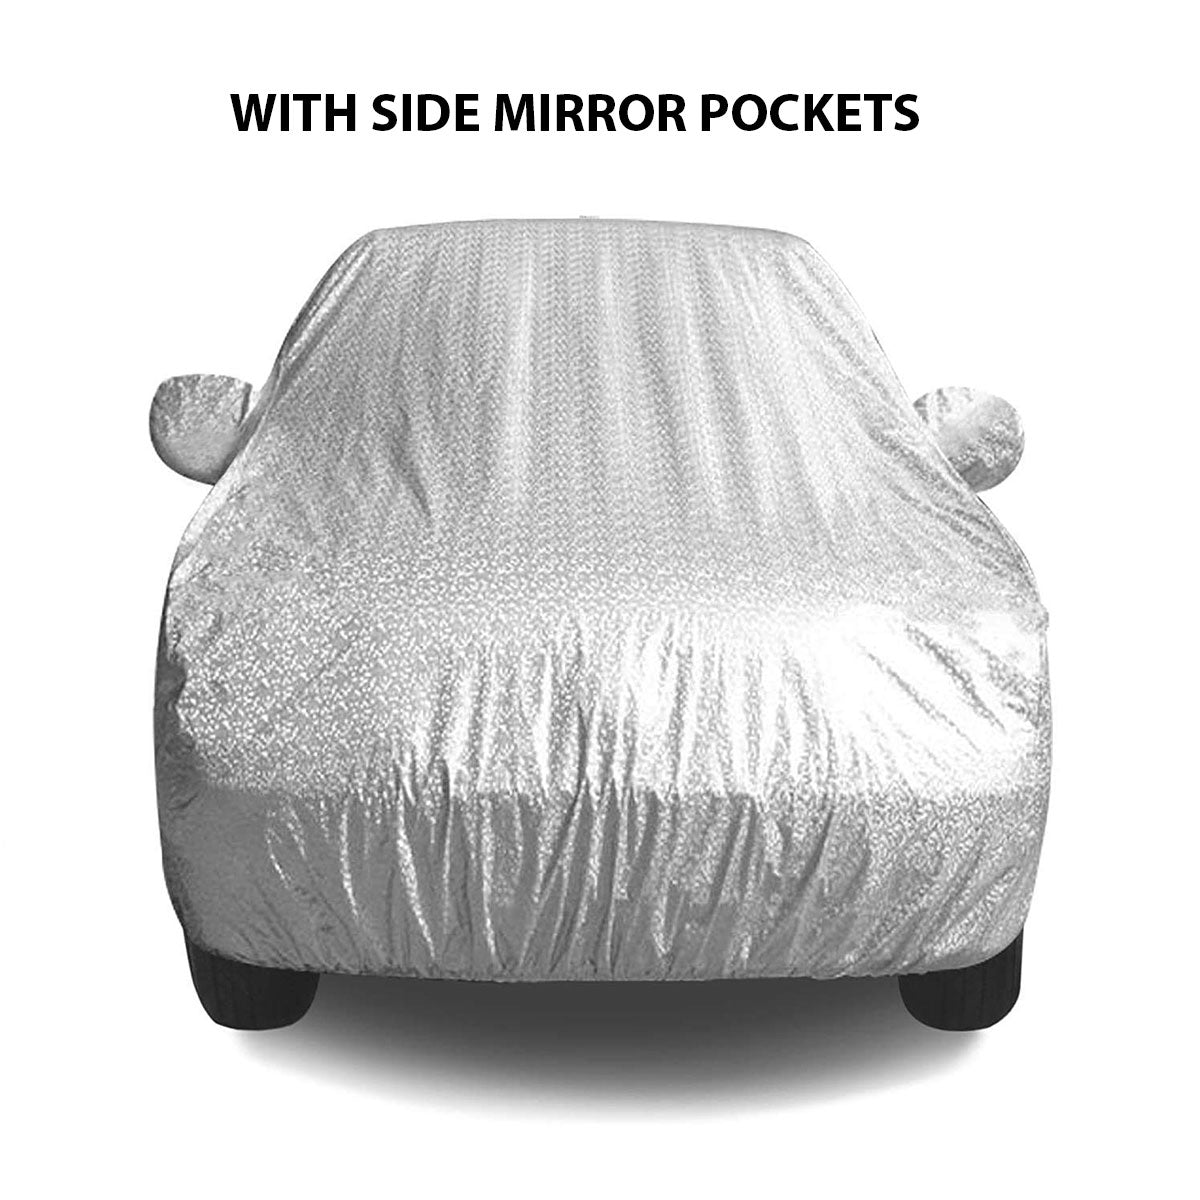 Oshotto Spyro Silver Anti Reflective, dustproof and Water Proof Car Body Cover with Mirror Pockets For Hyundai Creta (2015-2019) All Models